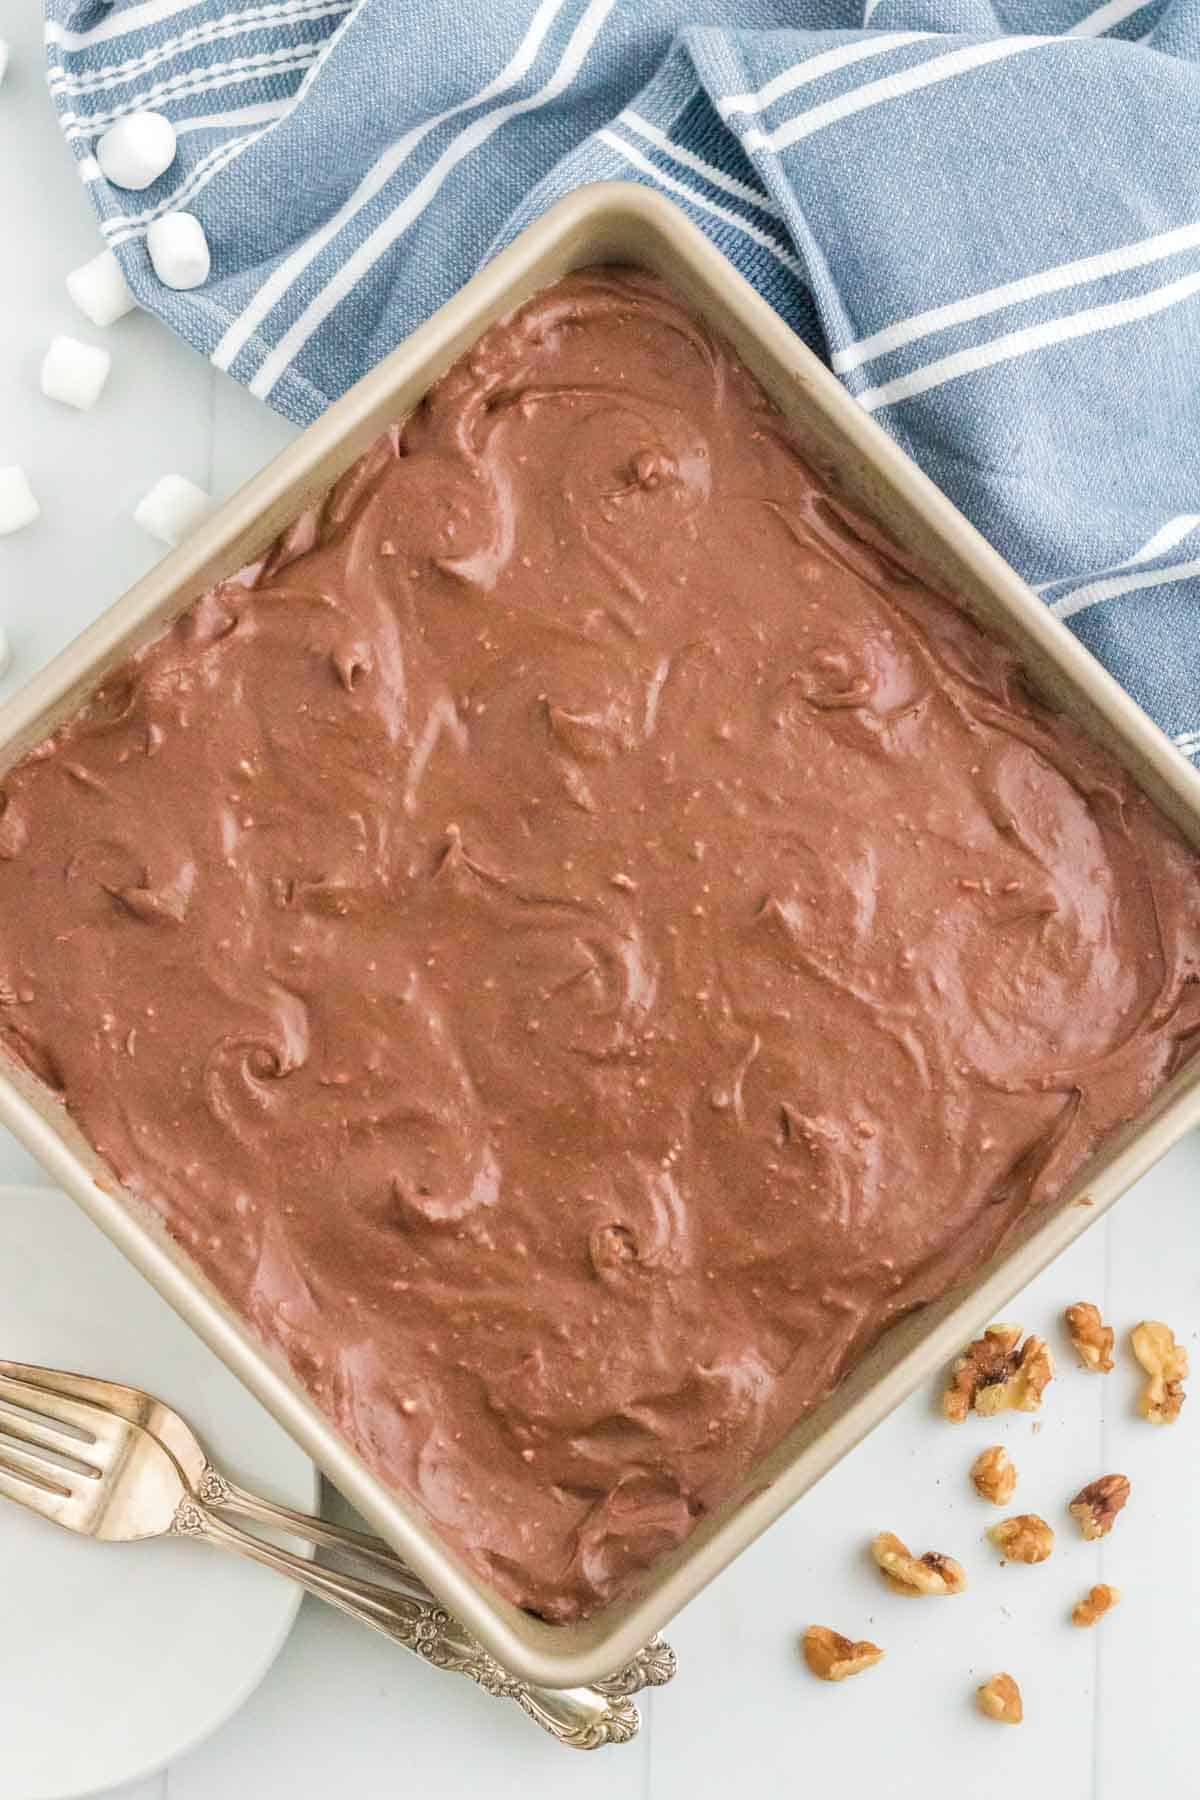 A pan of frosted rocky road brownies.